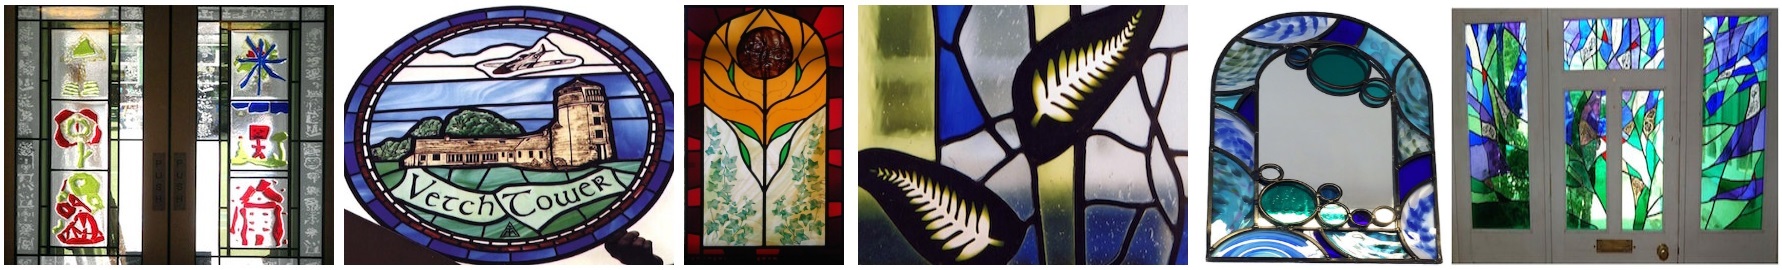 Stained glass examples